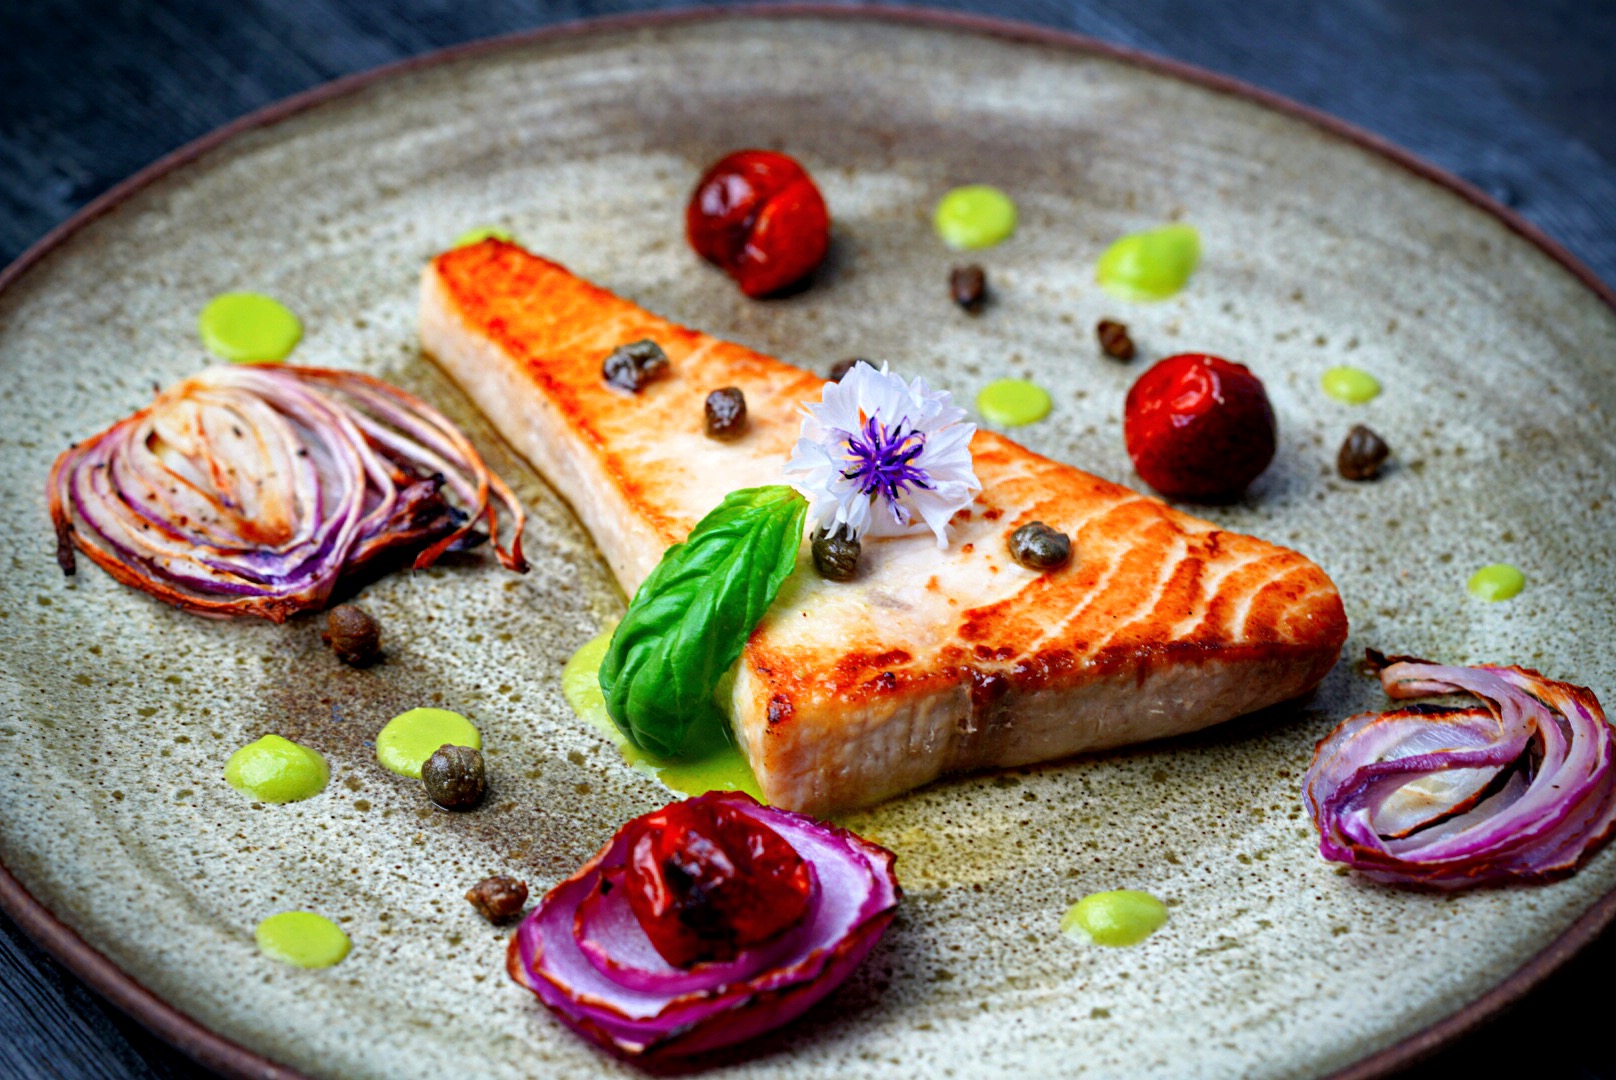 Swordfish Steak with Cherry Tomatoes, Capers and Red Onion